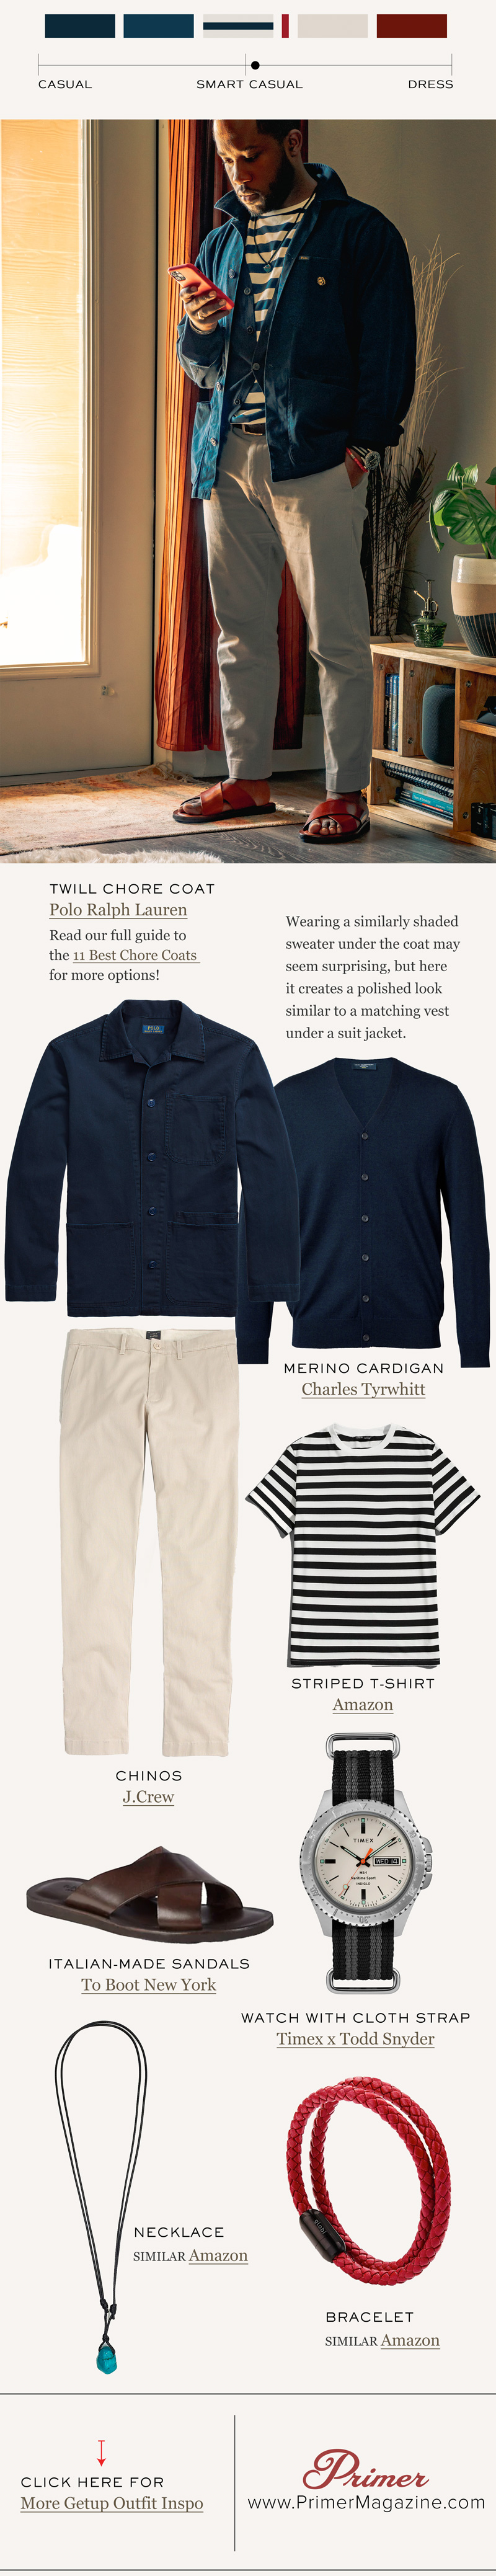 Spring Layers men's outfit ideas and inspiration